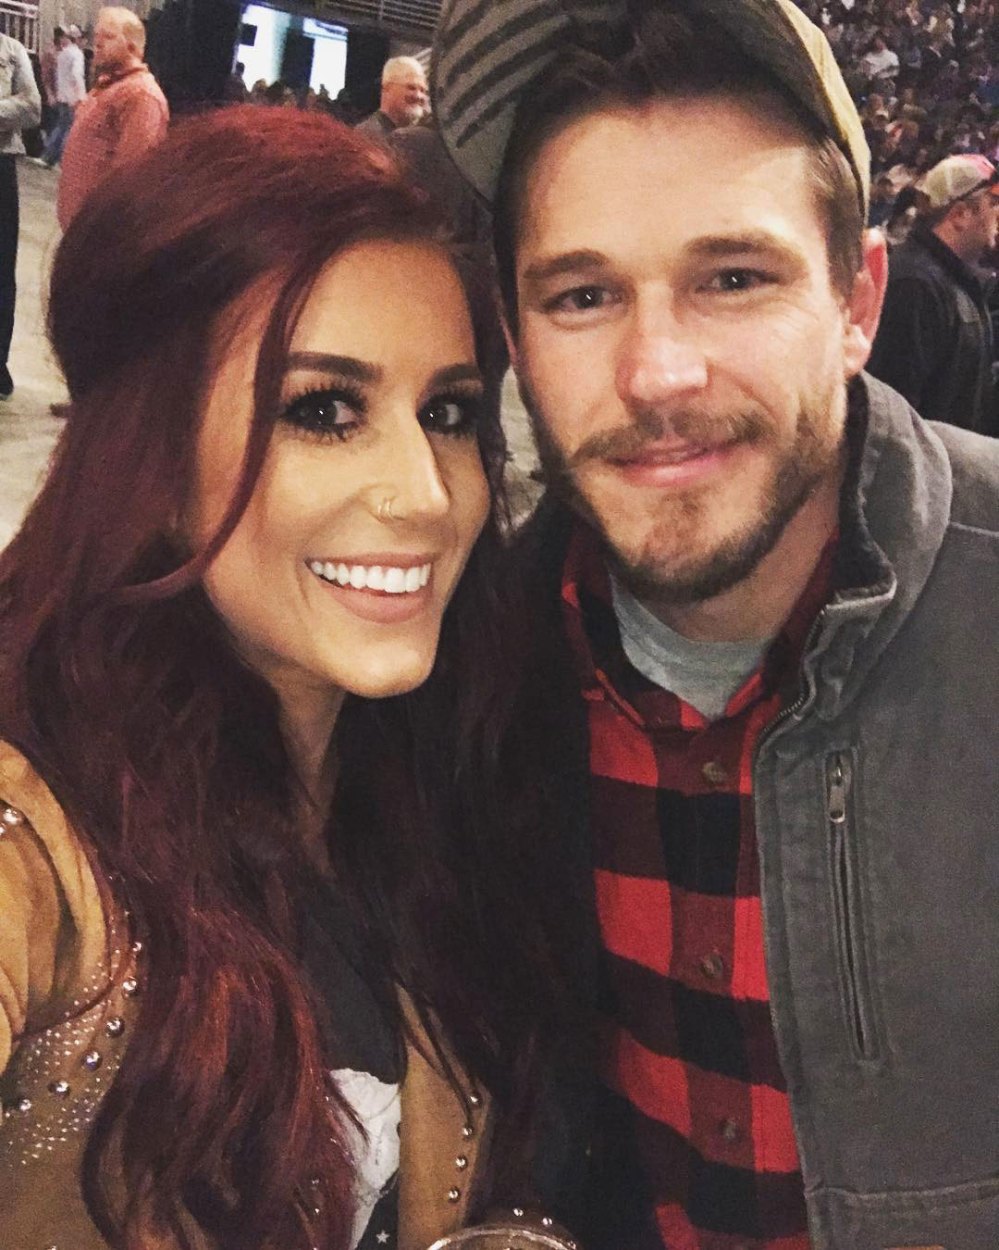 Teen Mom 2 Pregnant Chelsea Houska Reveals the Sex of Her 4th Child Cole DeBoer